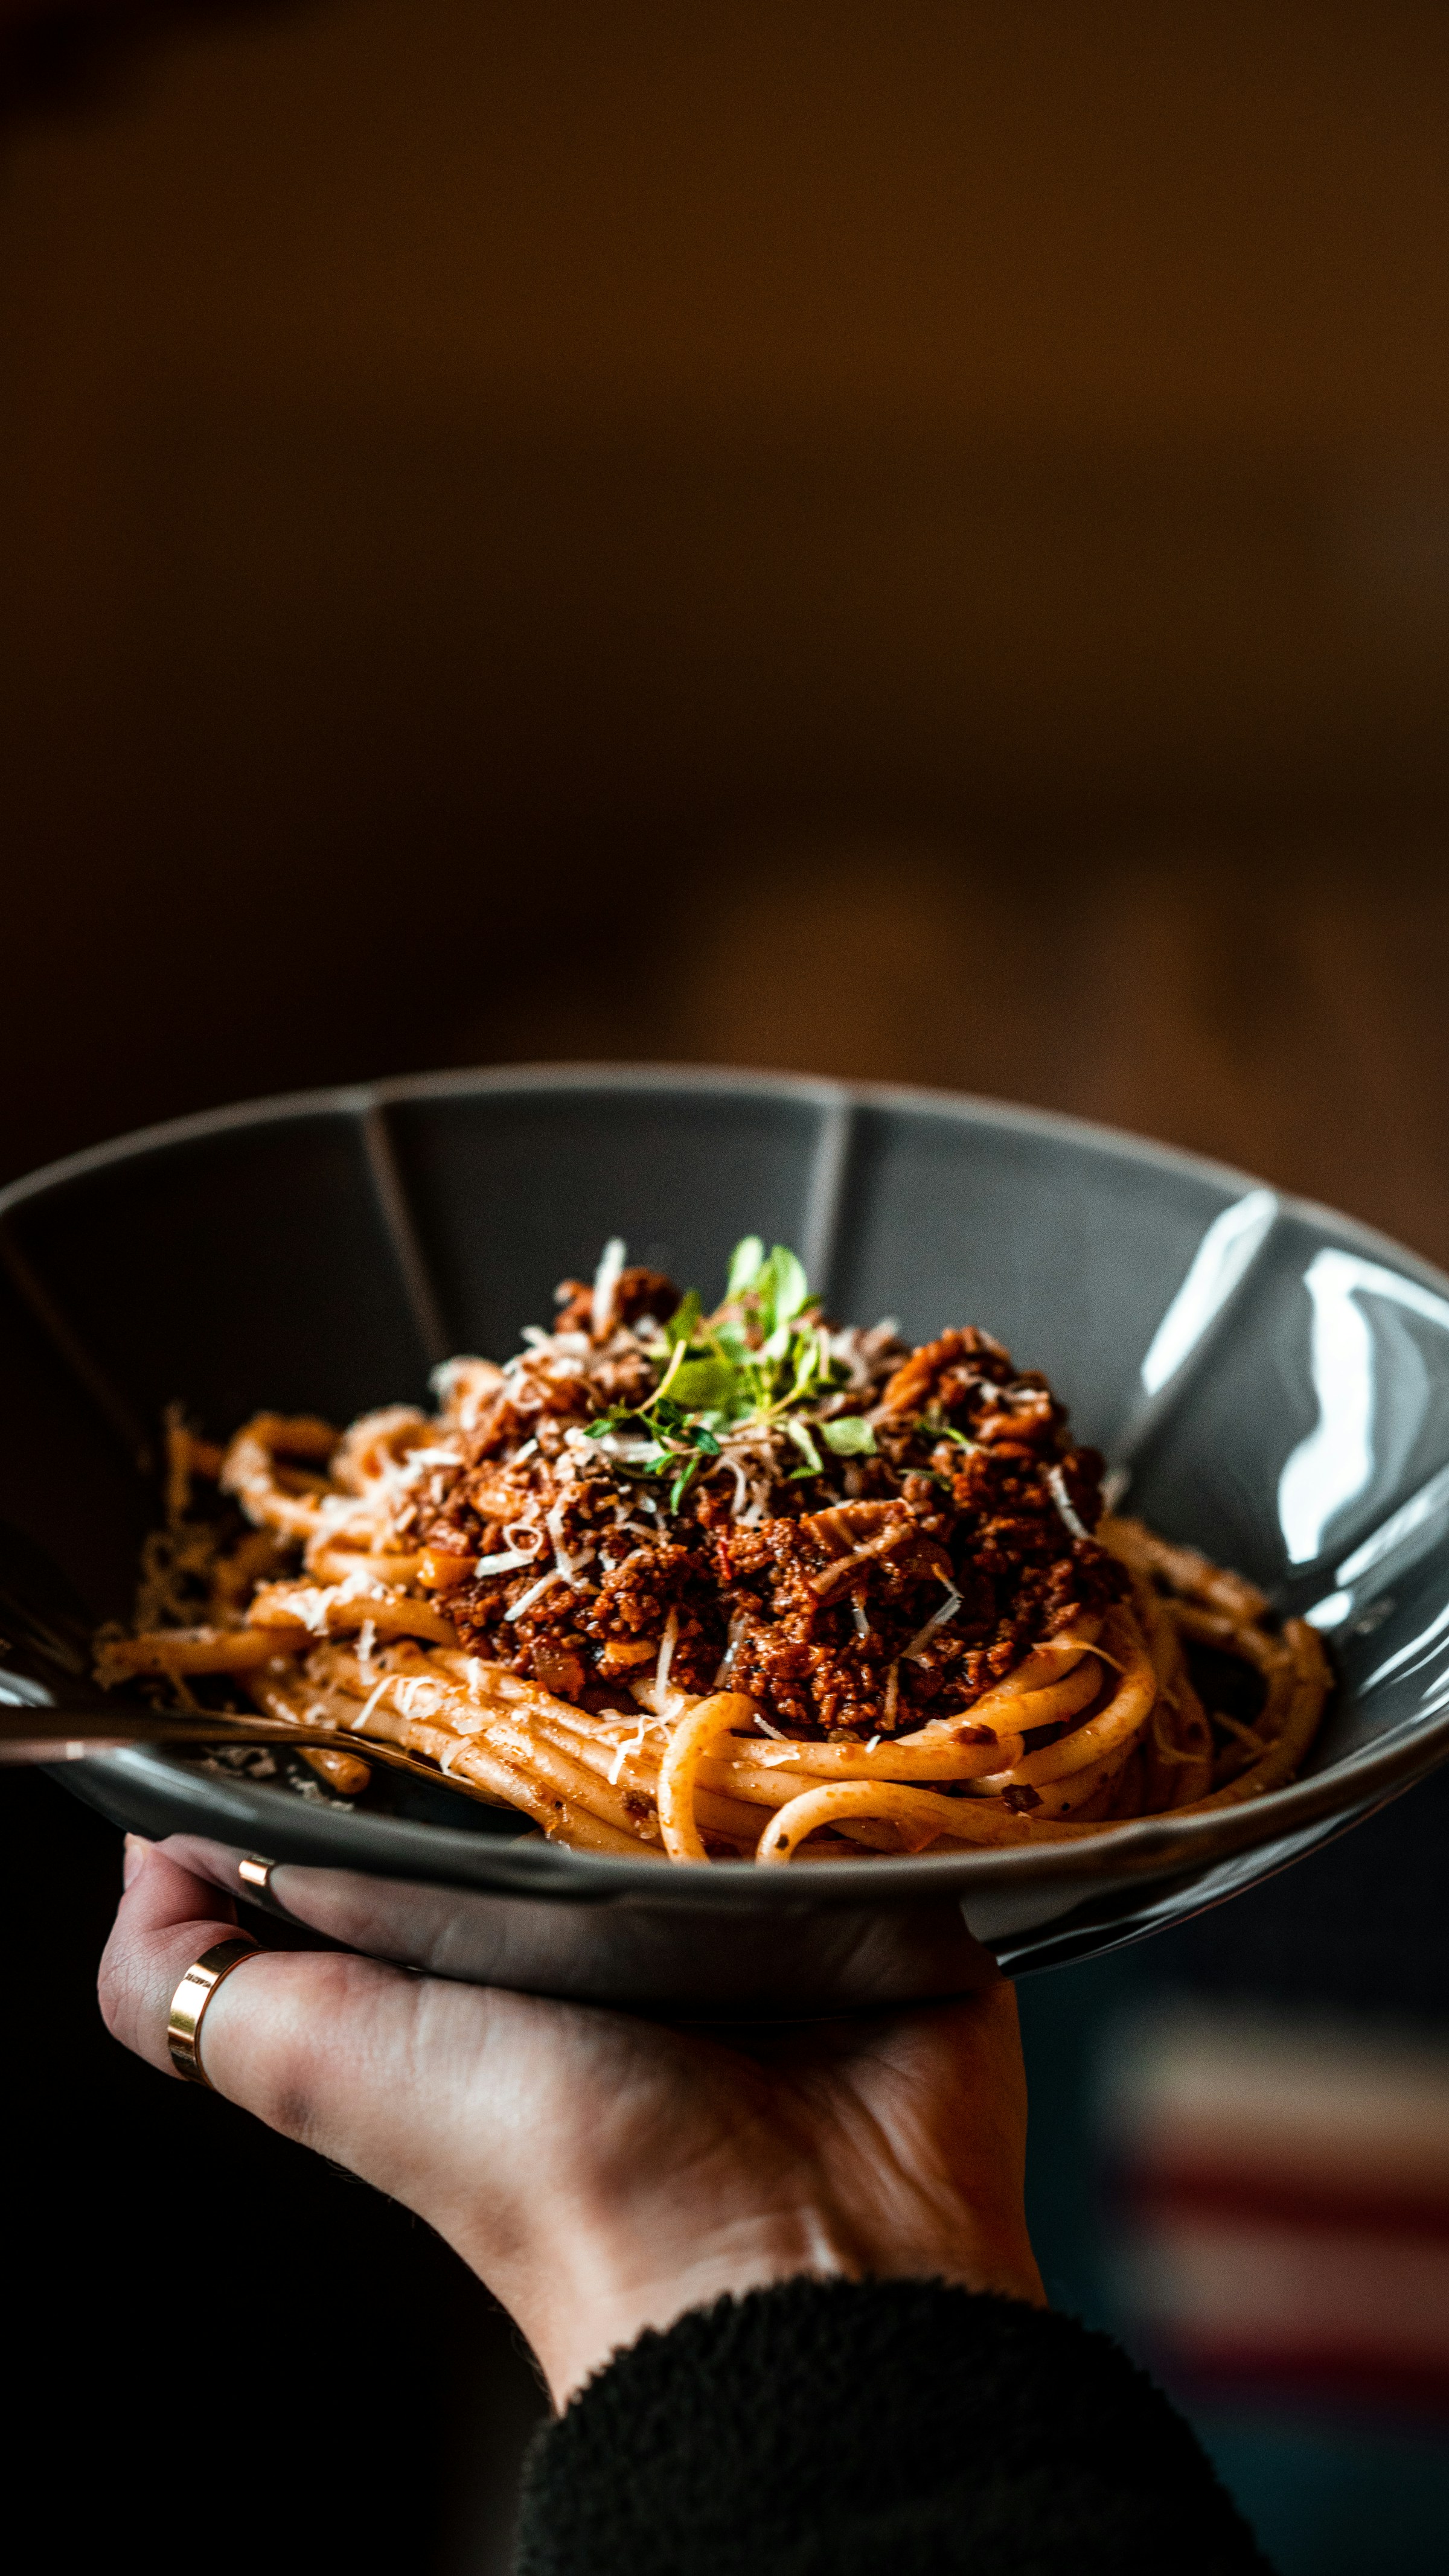 A person holding a bowl of pasta | Source: Unsplash